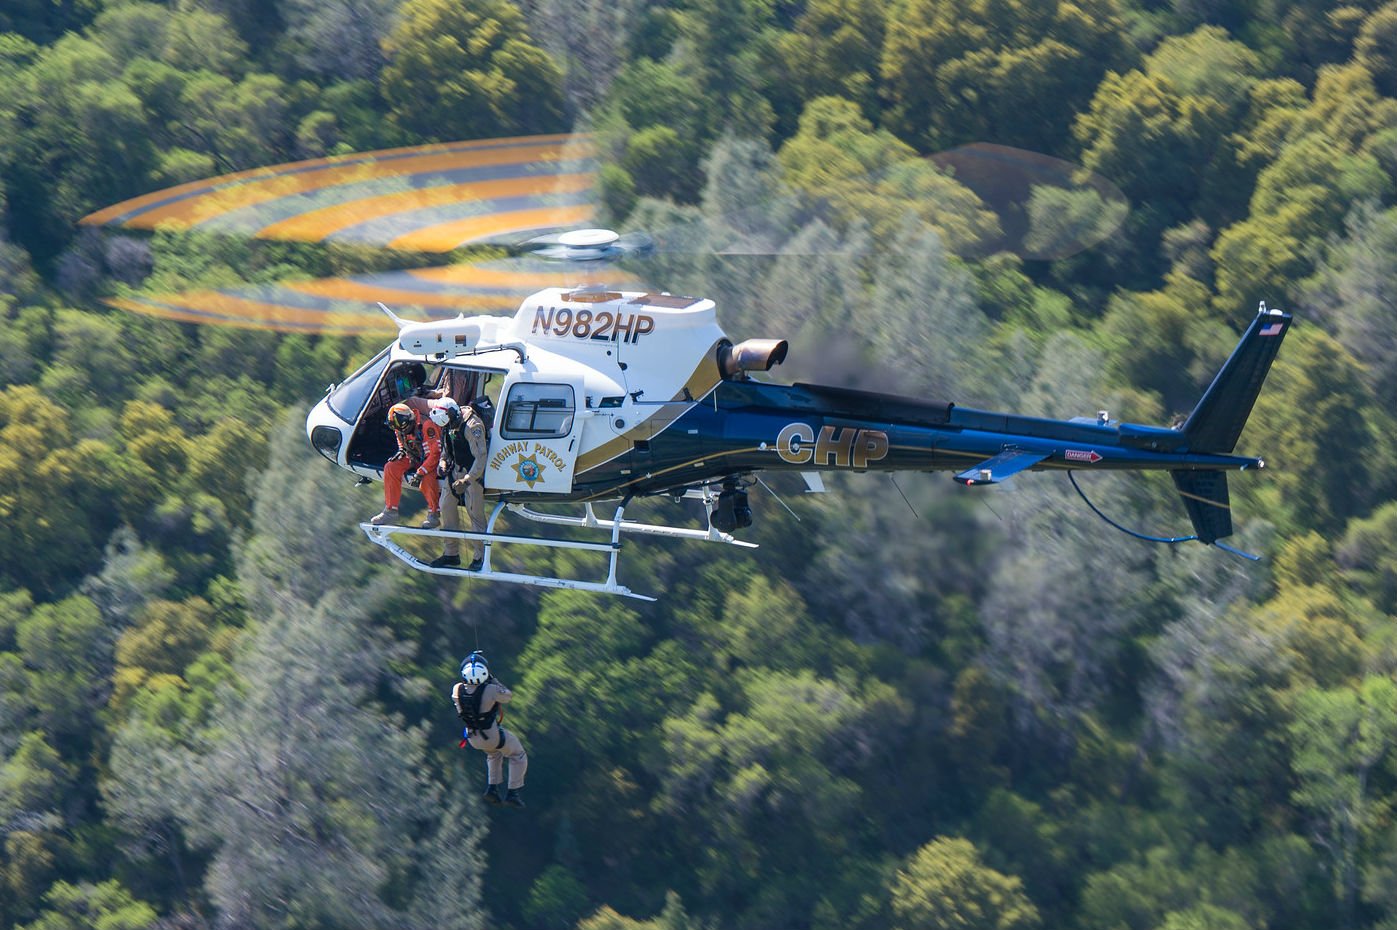 While the CHP crews maintain currency in conducting human external load missions, the Goodrich hoists installed aboard the new H125s are providing improved hoisting capabilities over the hoists installed on their legacy fleet of AS350 B3s. Dan Megna Photo